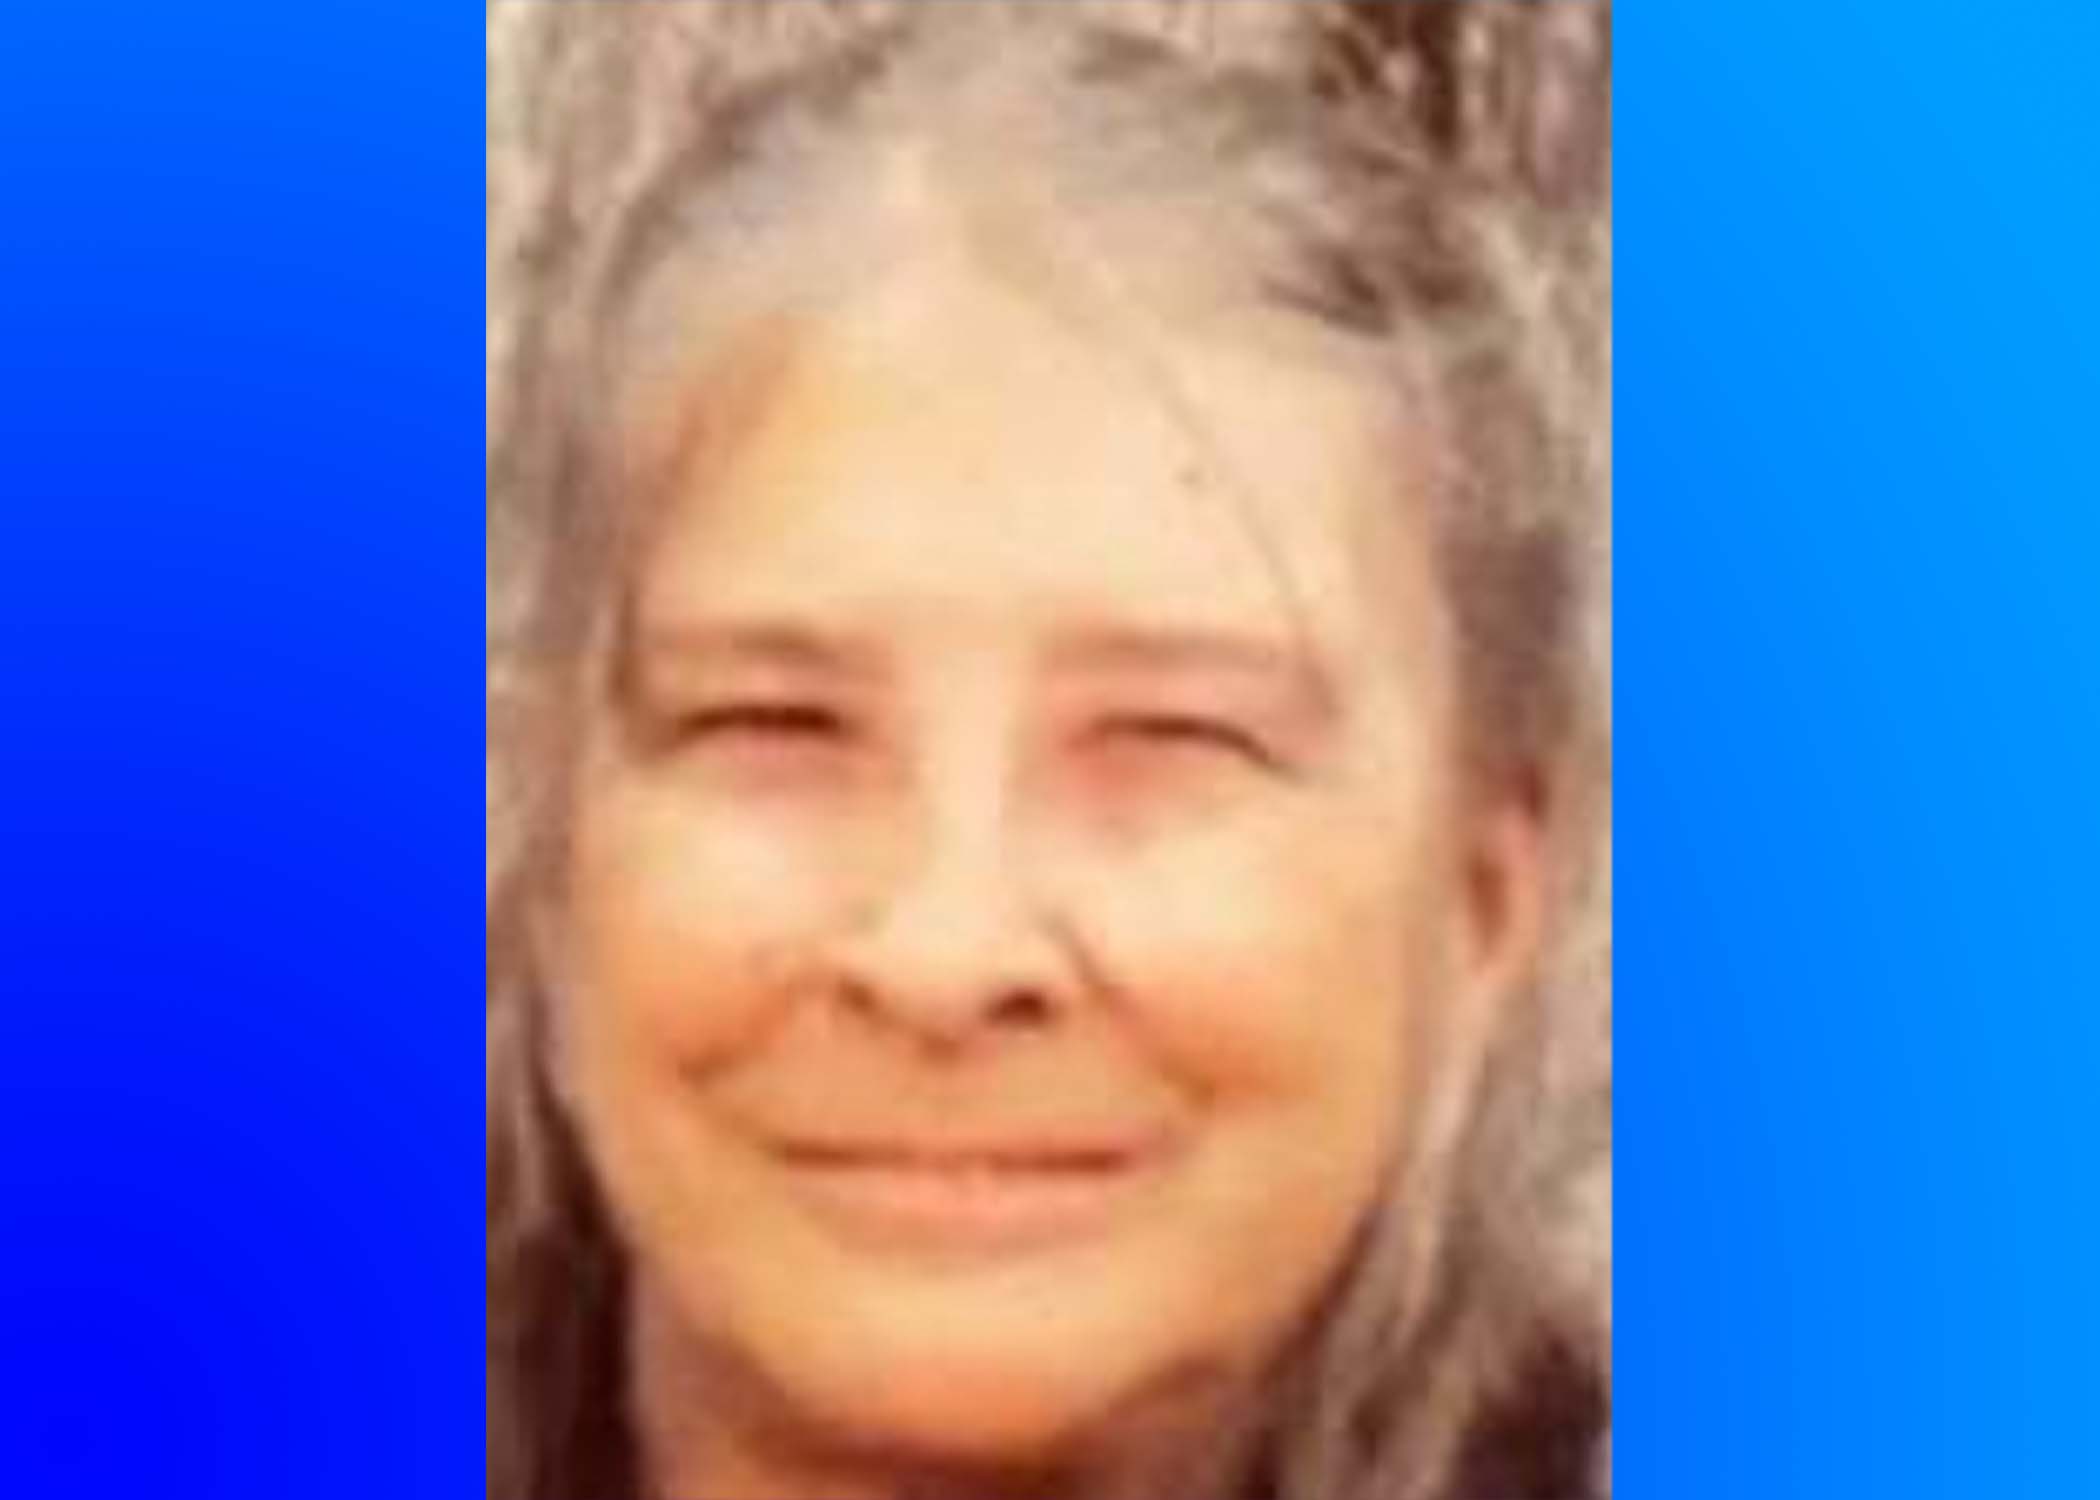 Missing and Endangered Person Alert Issued for Autauga County woman